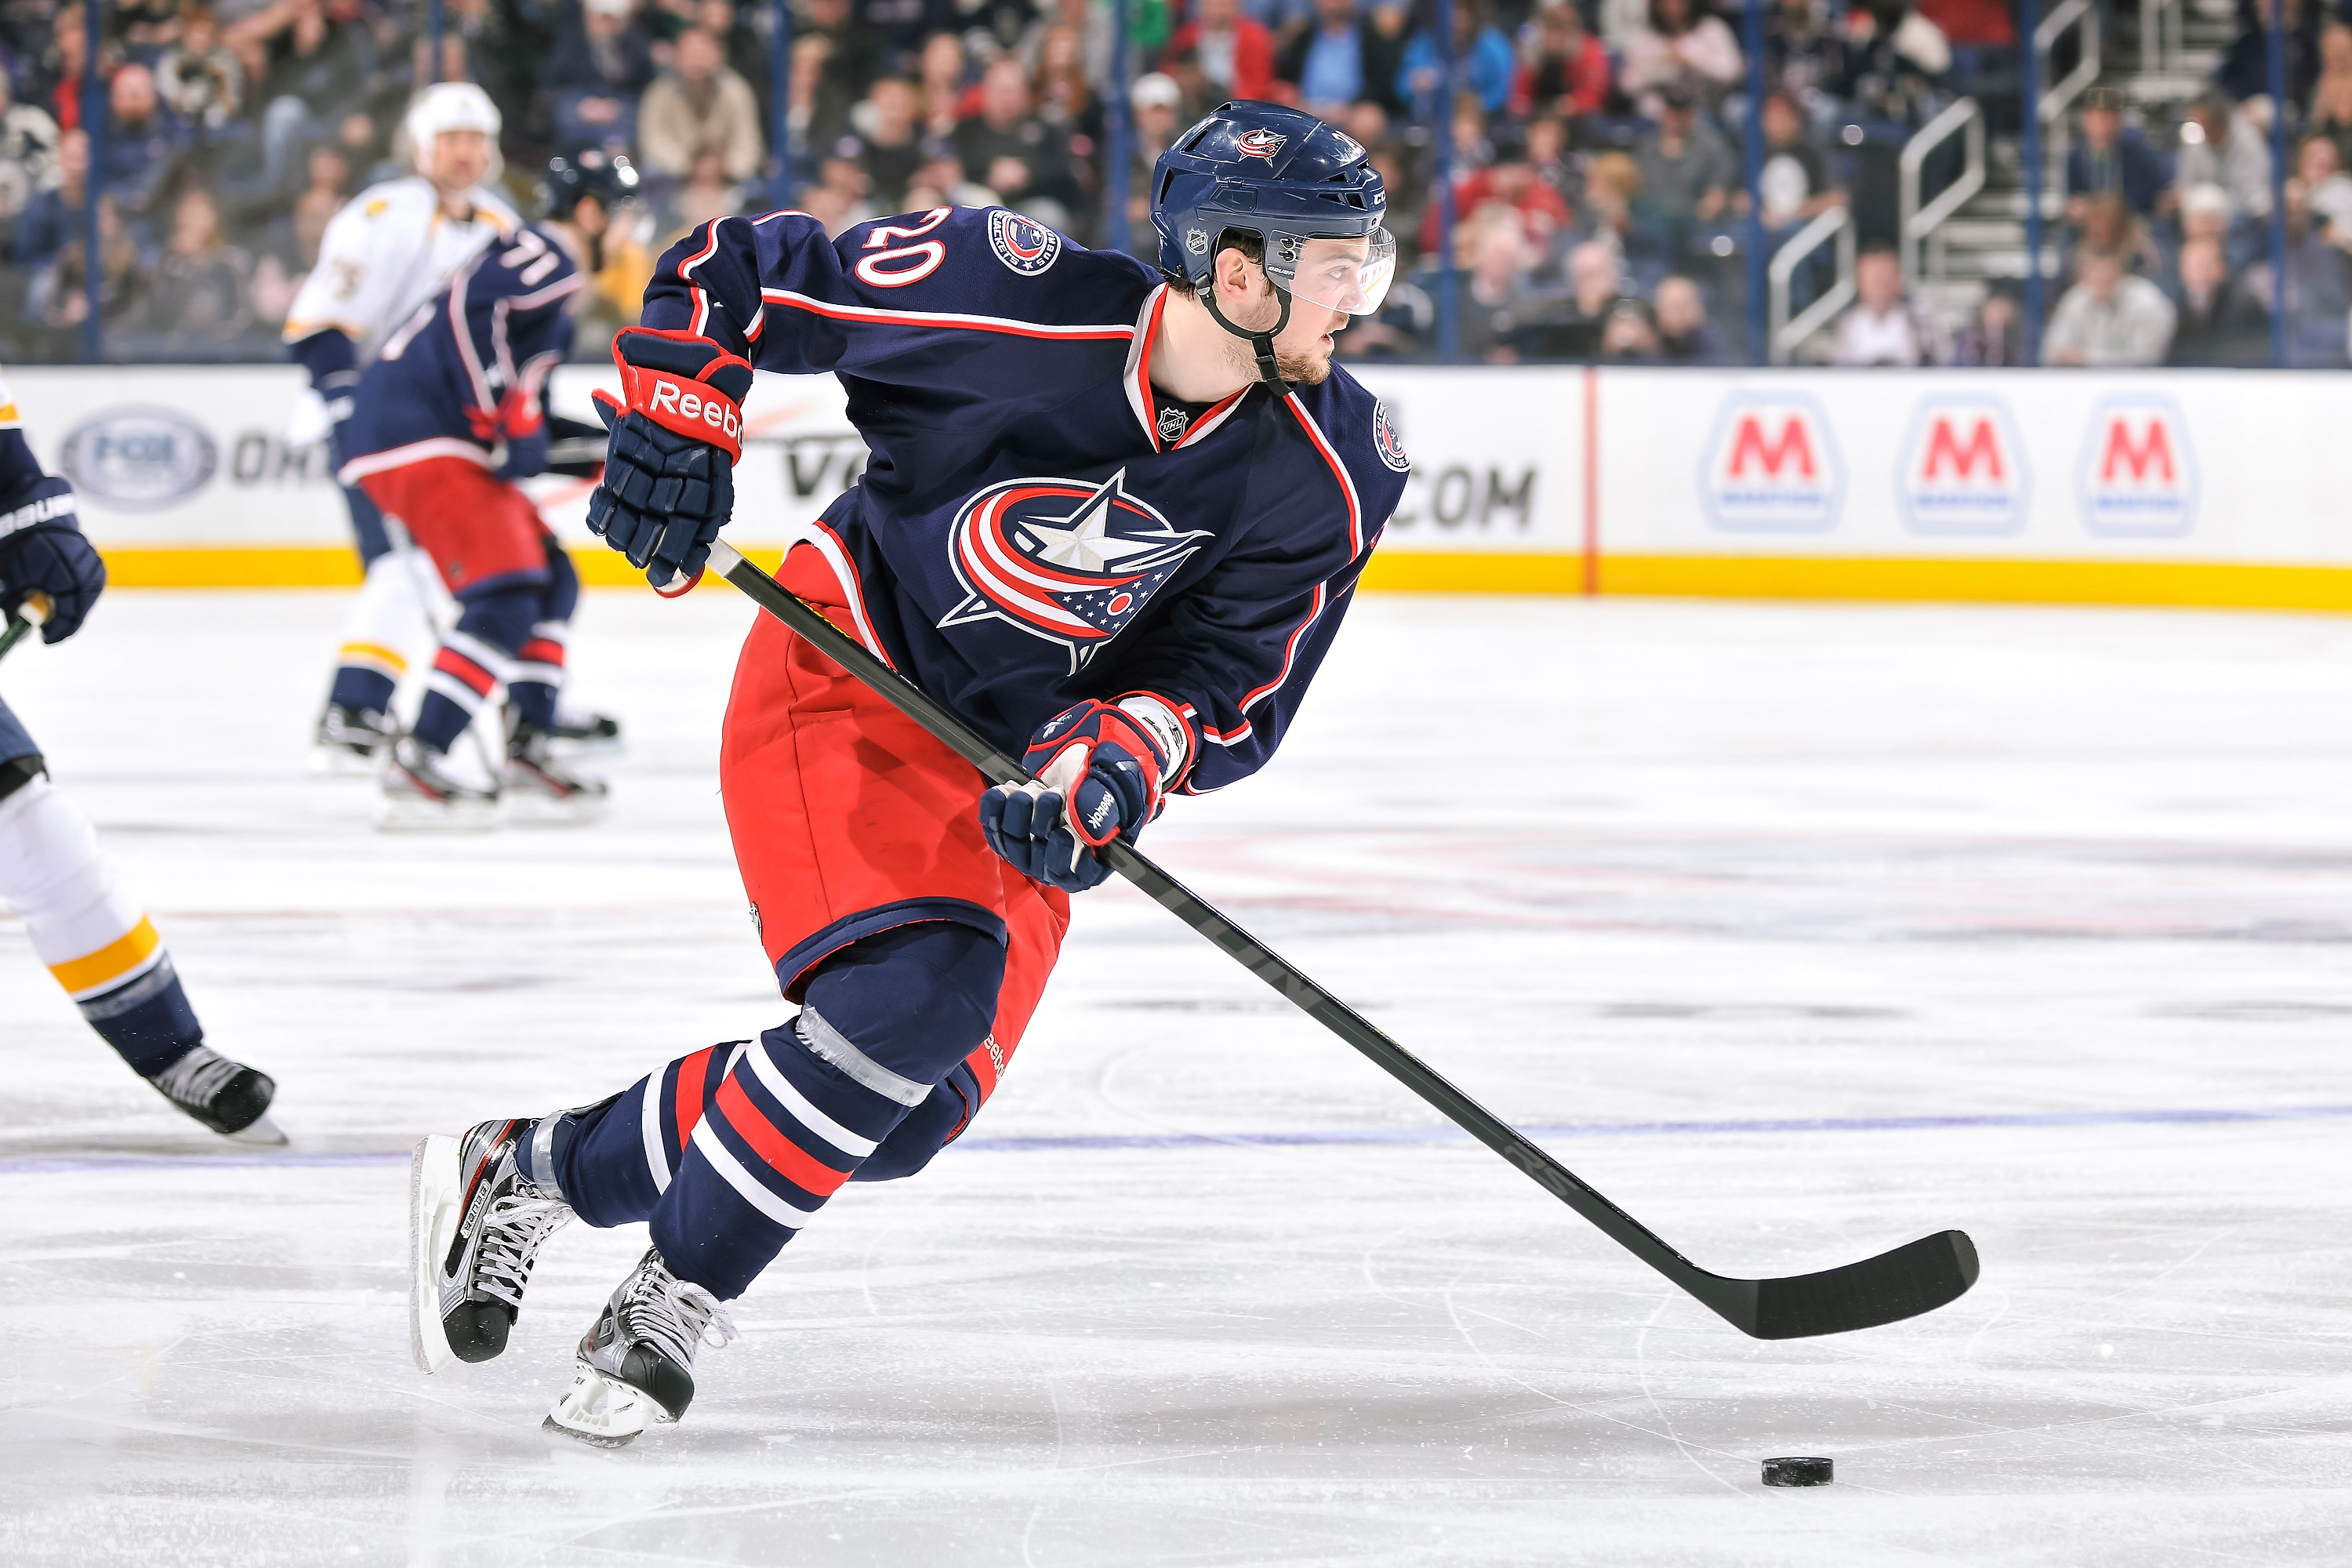 Columbus Blue Jackets Pics, Sports Collection